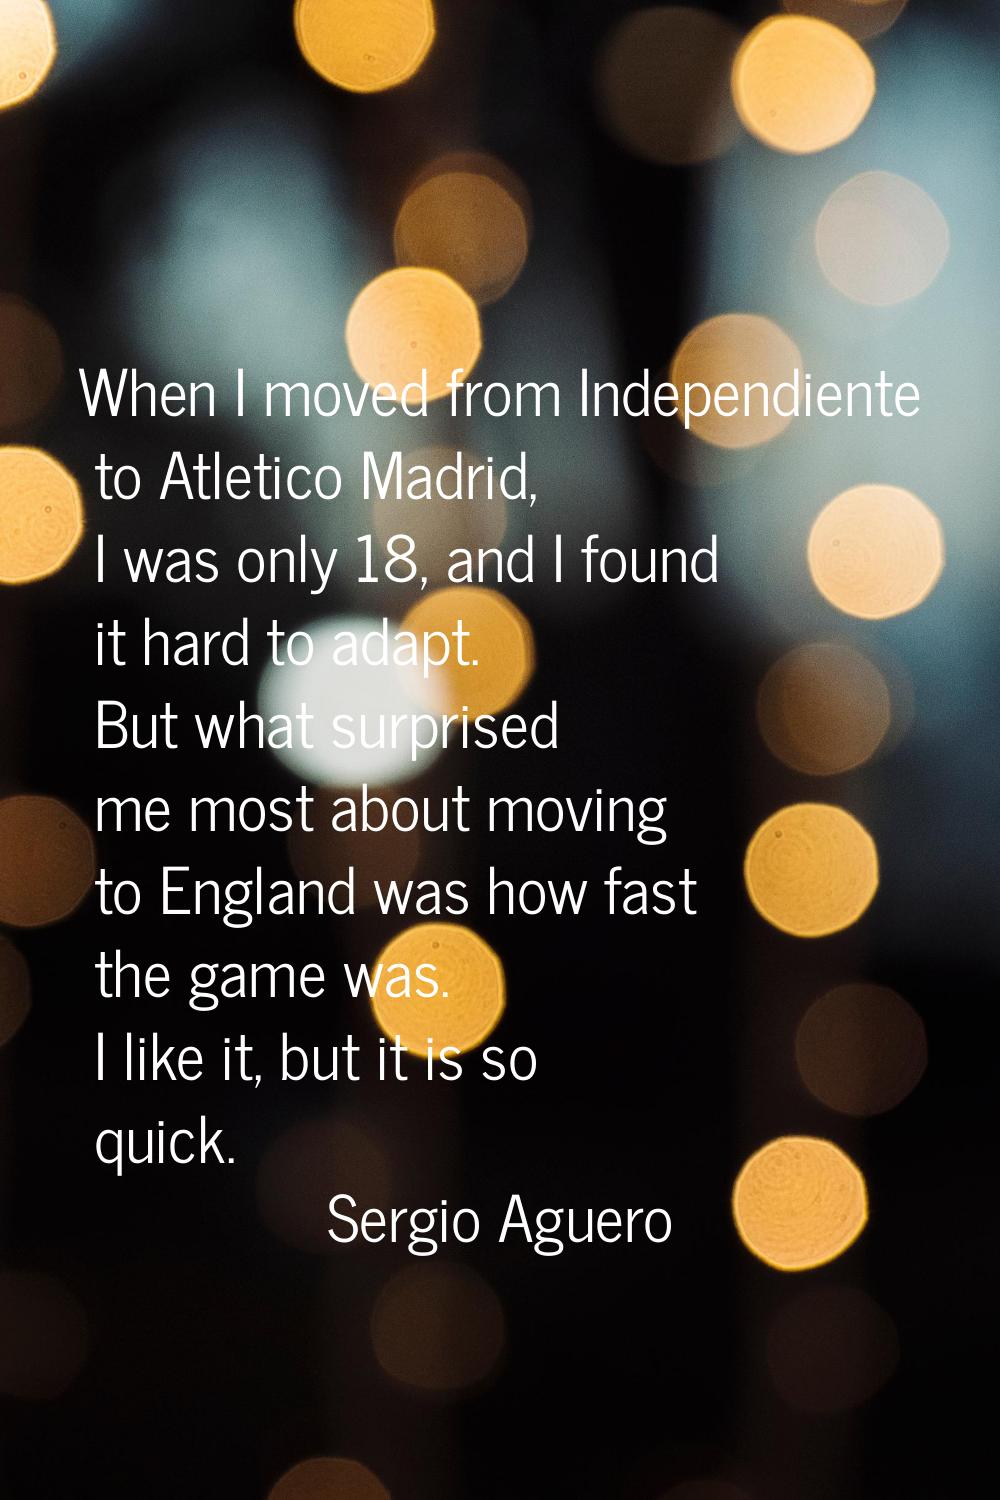 When I moved from Independiente to Atletico Madrid, I was only 18, and I found it hard to adapt. Bu